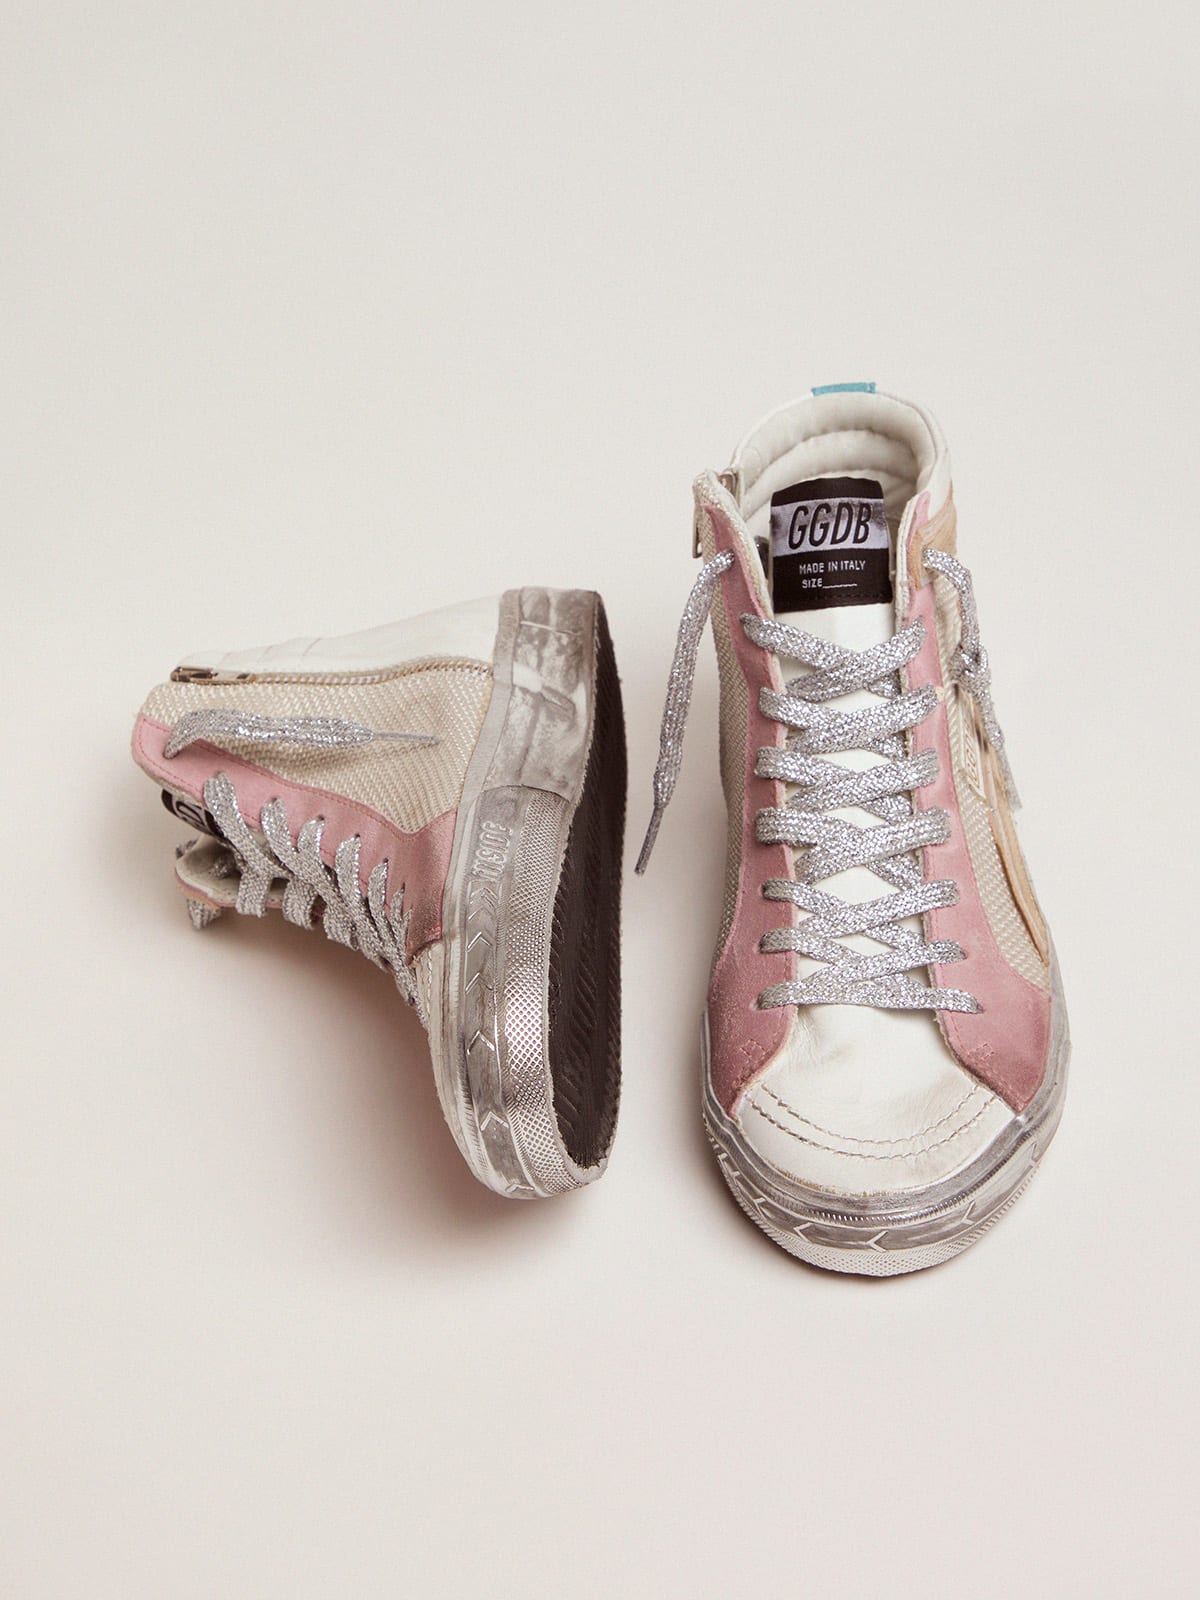 Slide sneakers with white and pink upper | Golden Goose